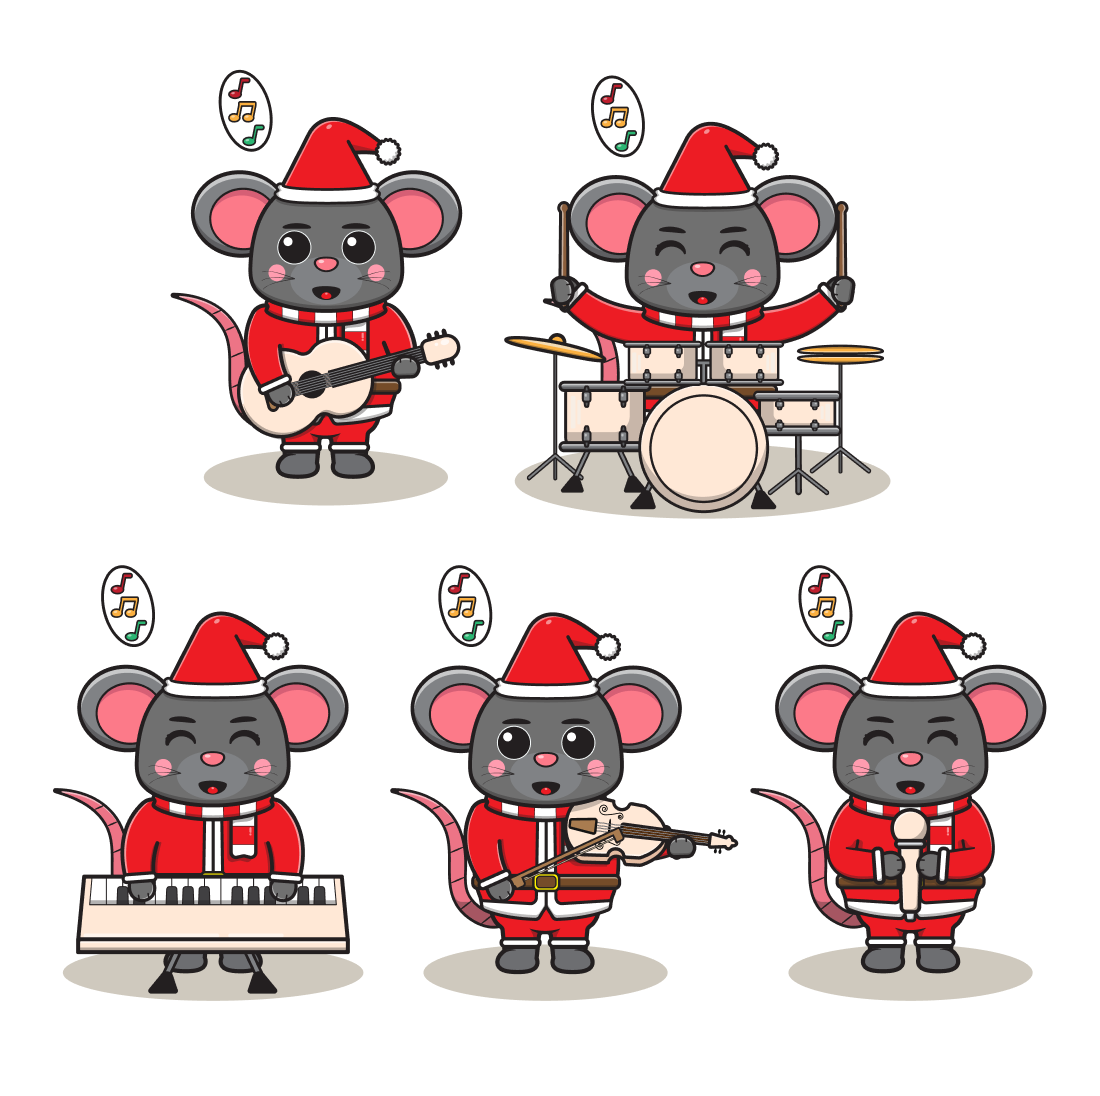 Cartoon mouse playing a musical instrument.